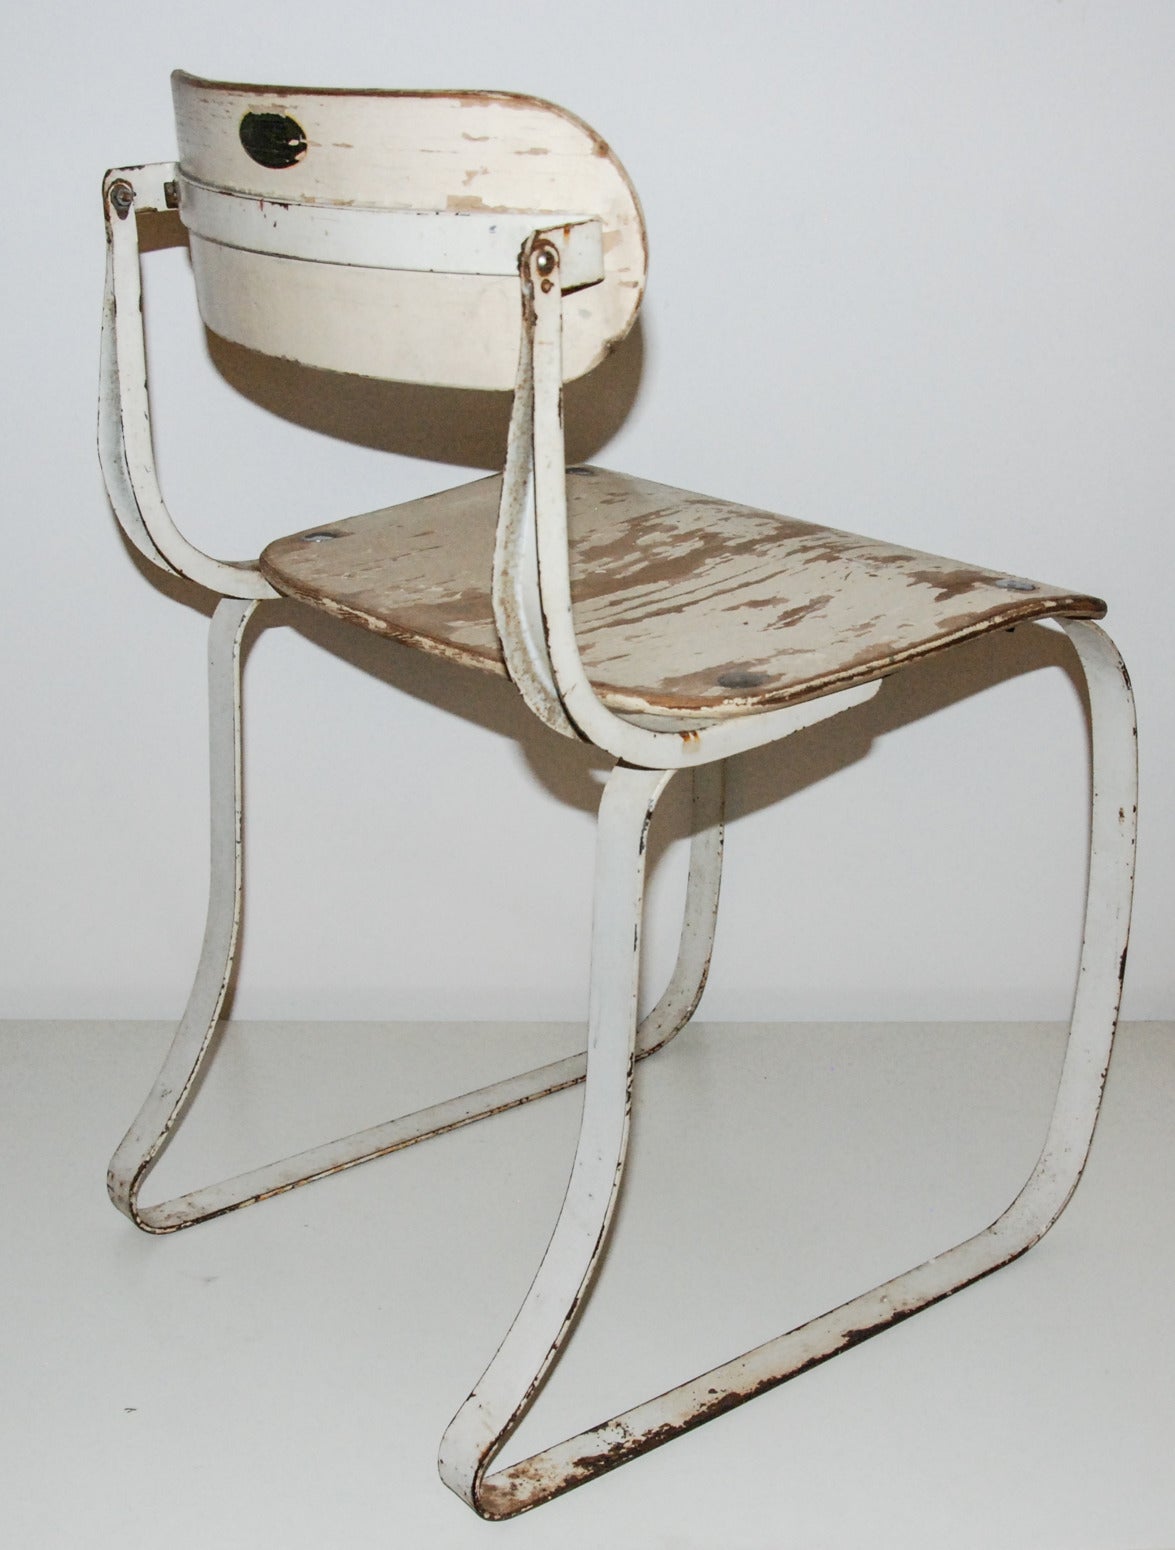 A fine and early example of the Health Chair designed for industrial machine operators. The laminated plywood on the seat and back were later replaced with stamped metal in the 1940s. The back pivots and has an applied decal with patent no.